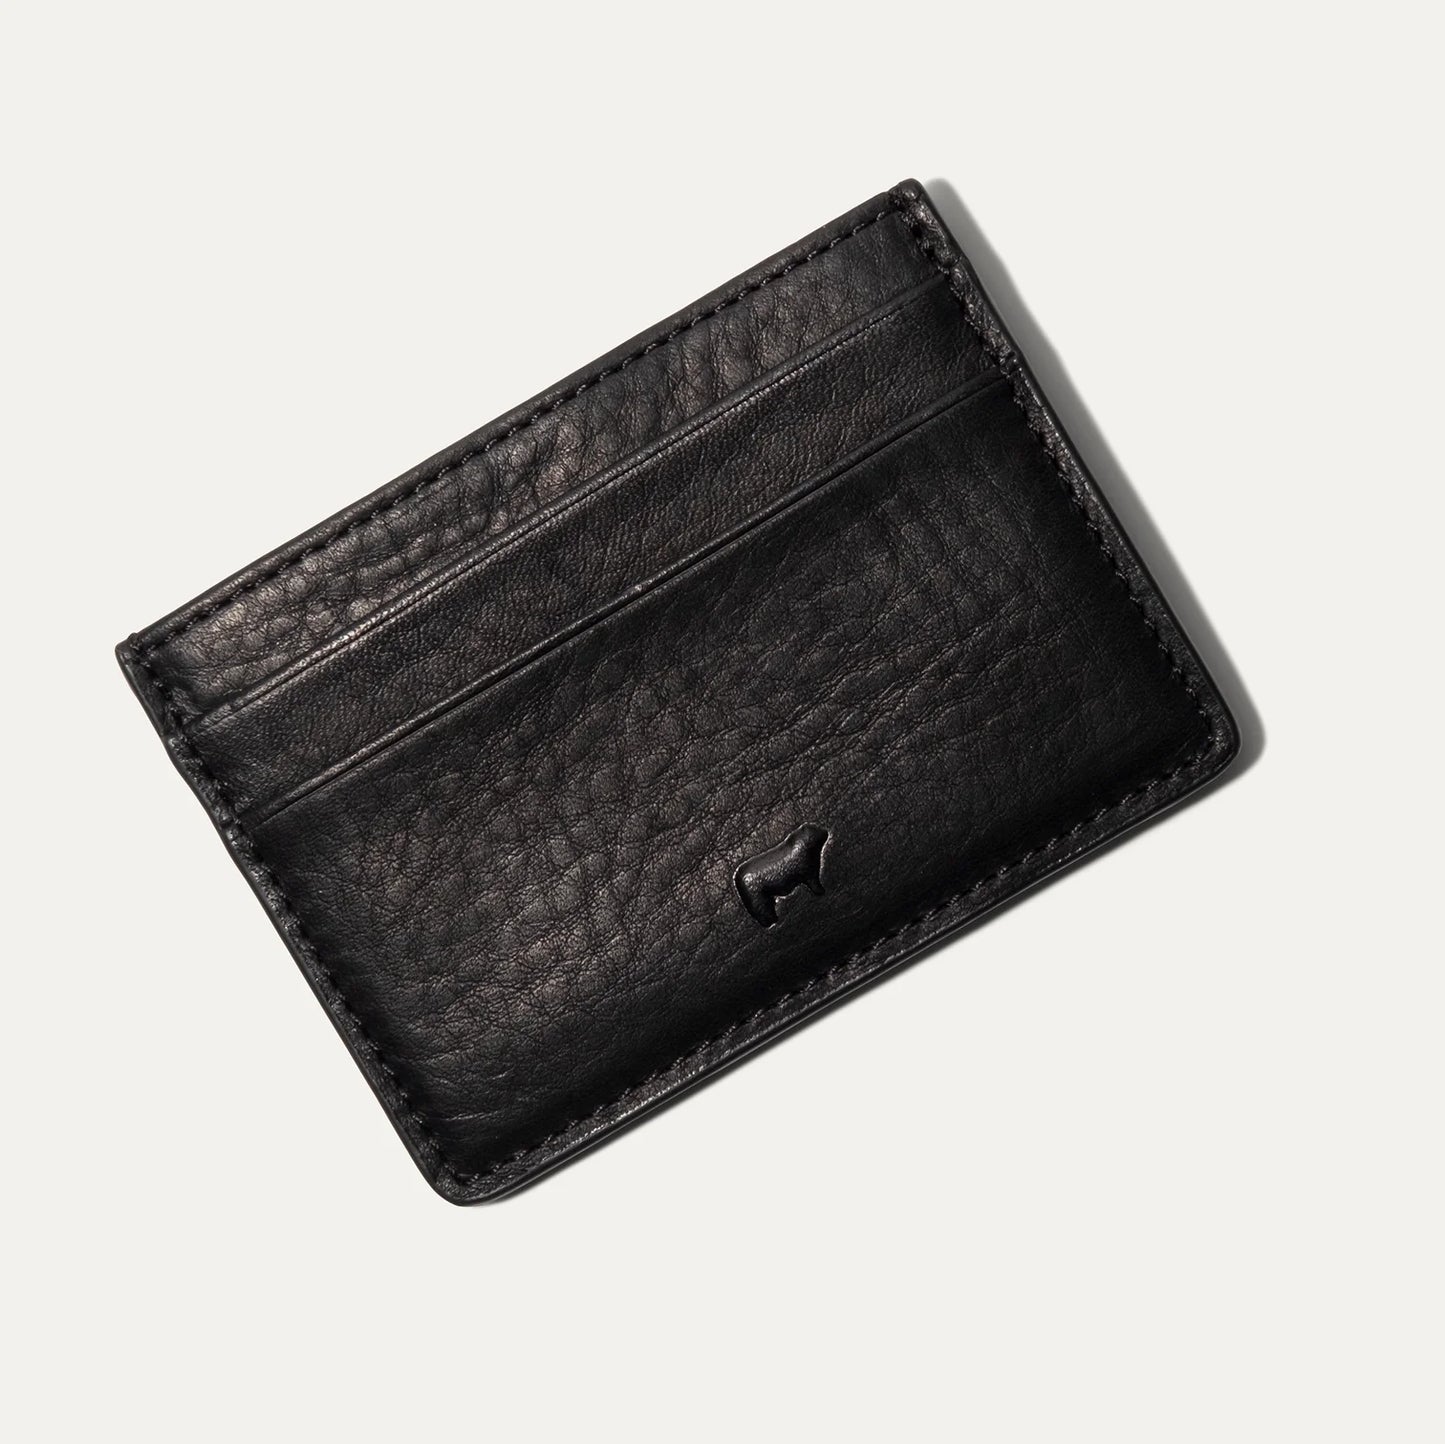 Will Leather Goods Classic Leather Card Case - Black